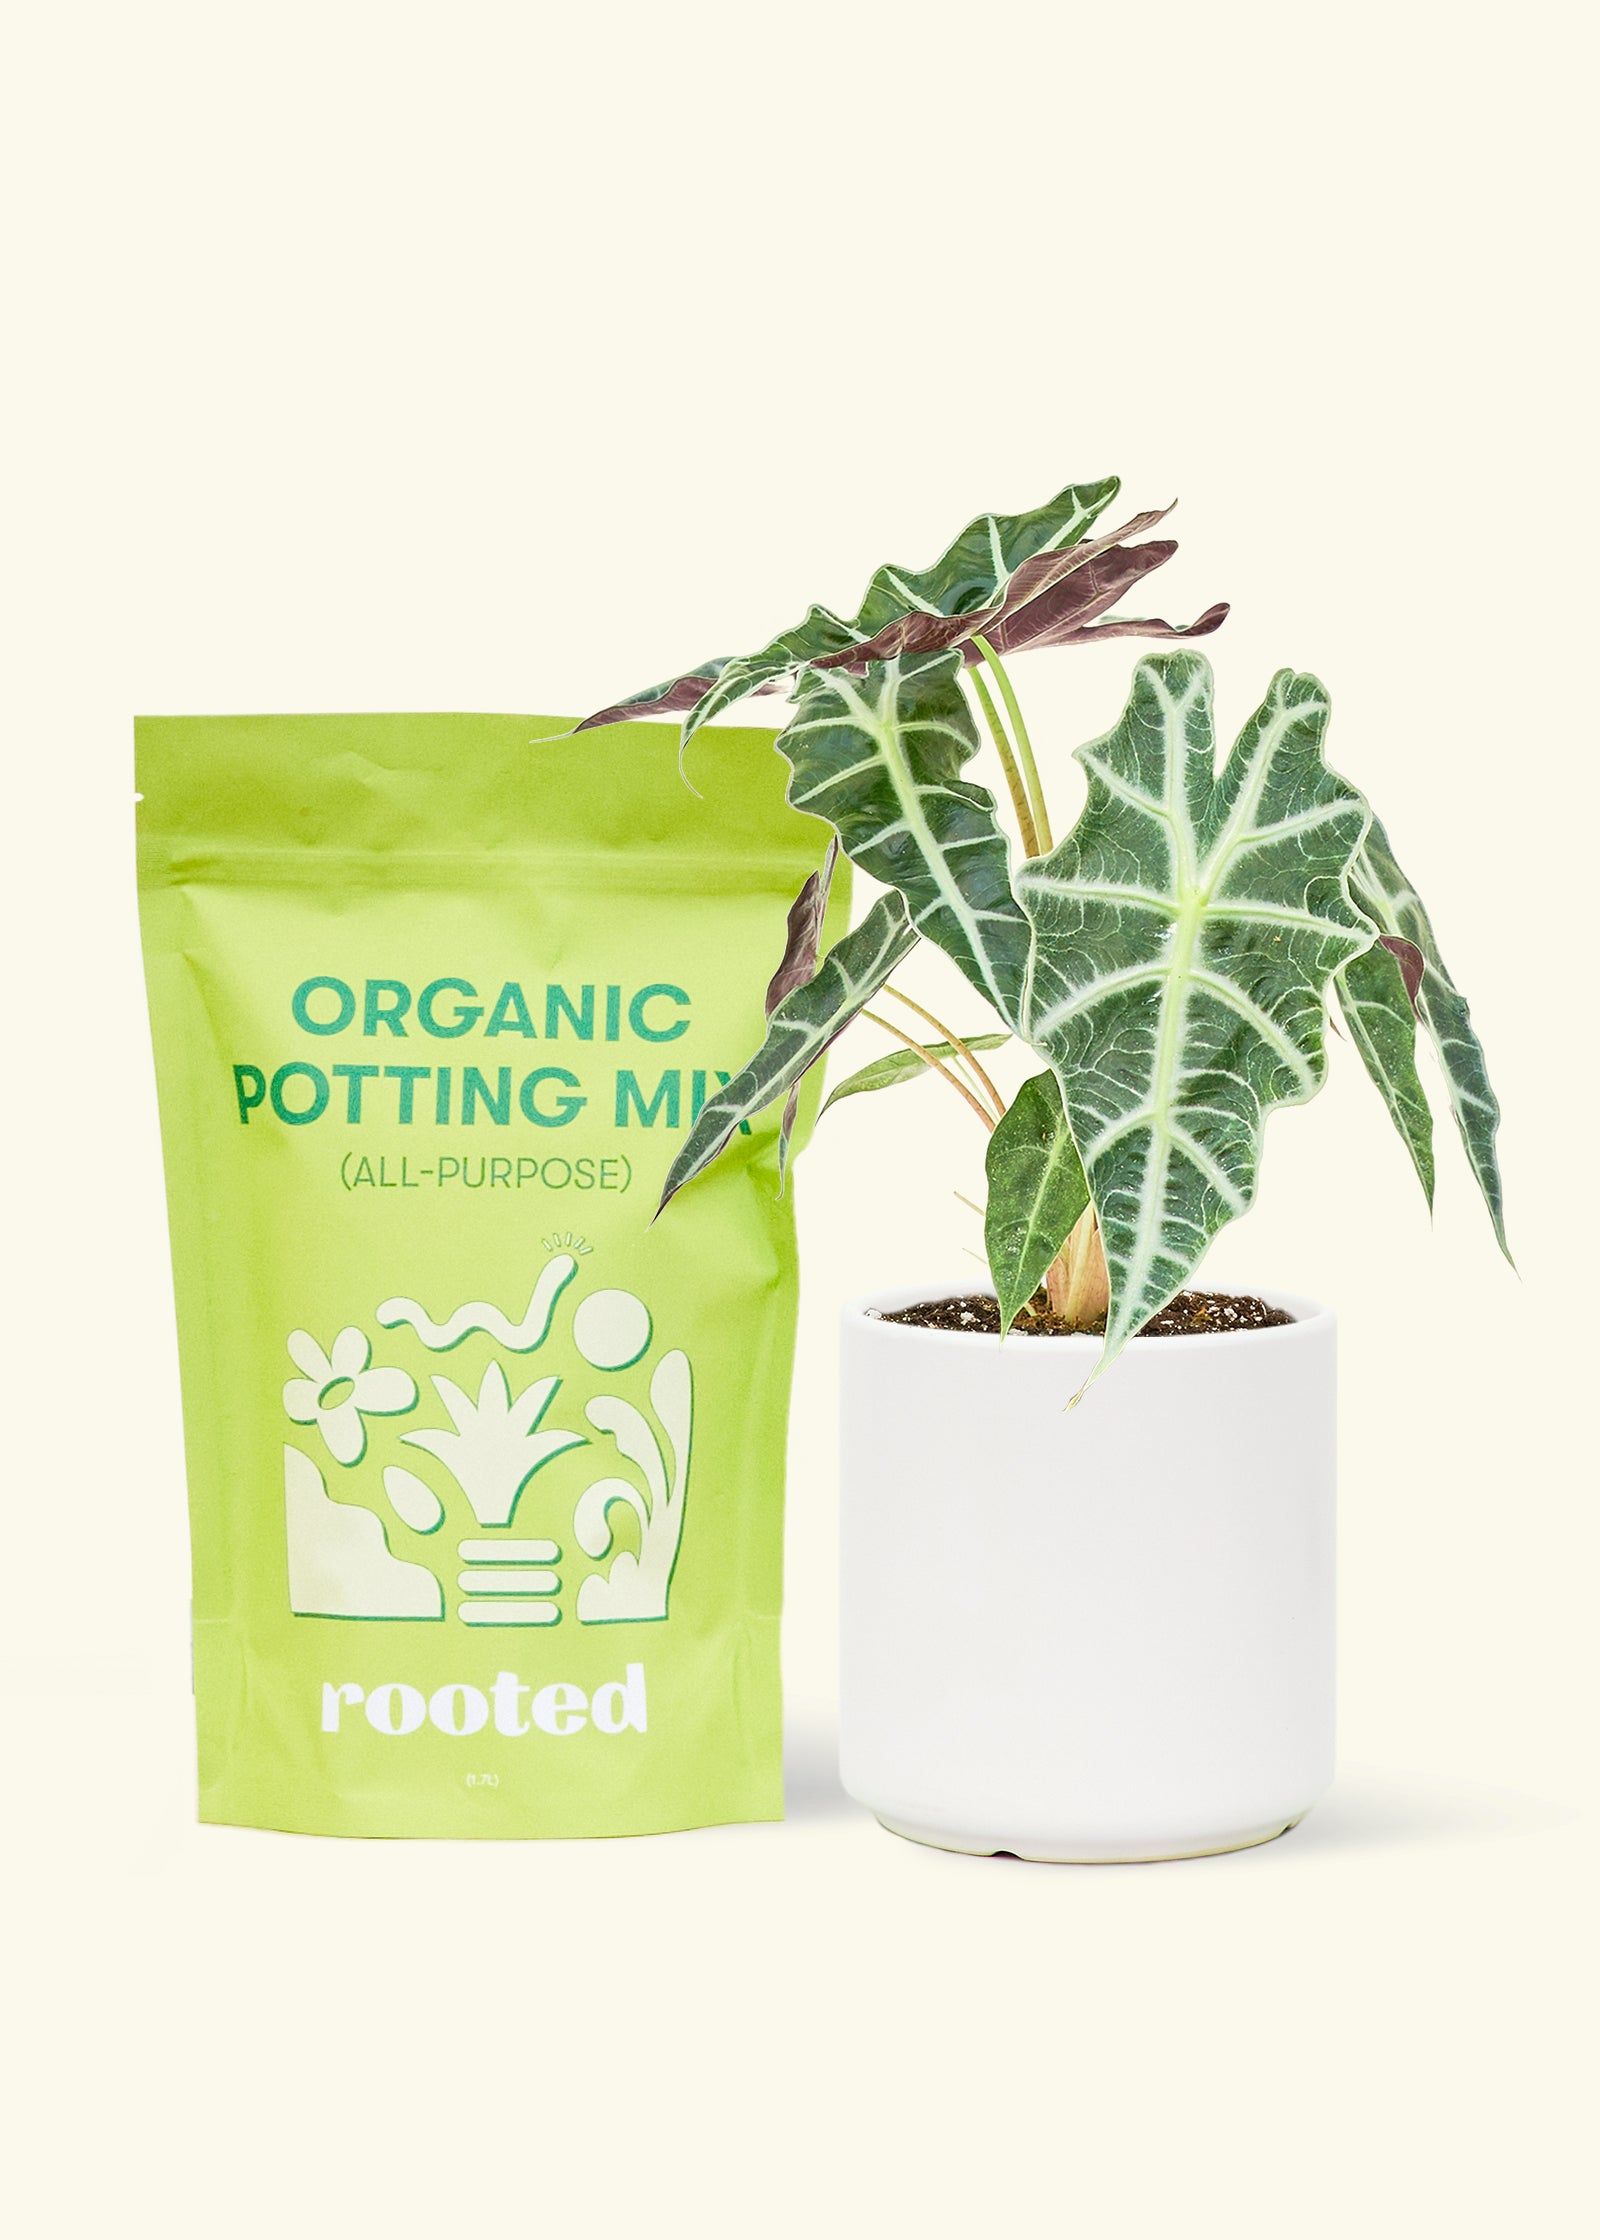 Small alocasia polly in a white cylinder pot and a bag of soil.